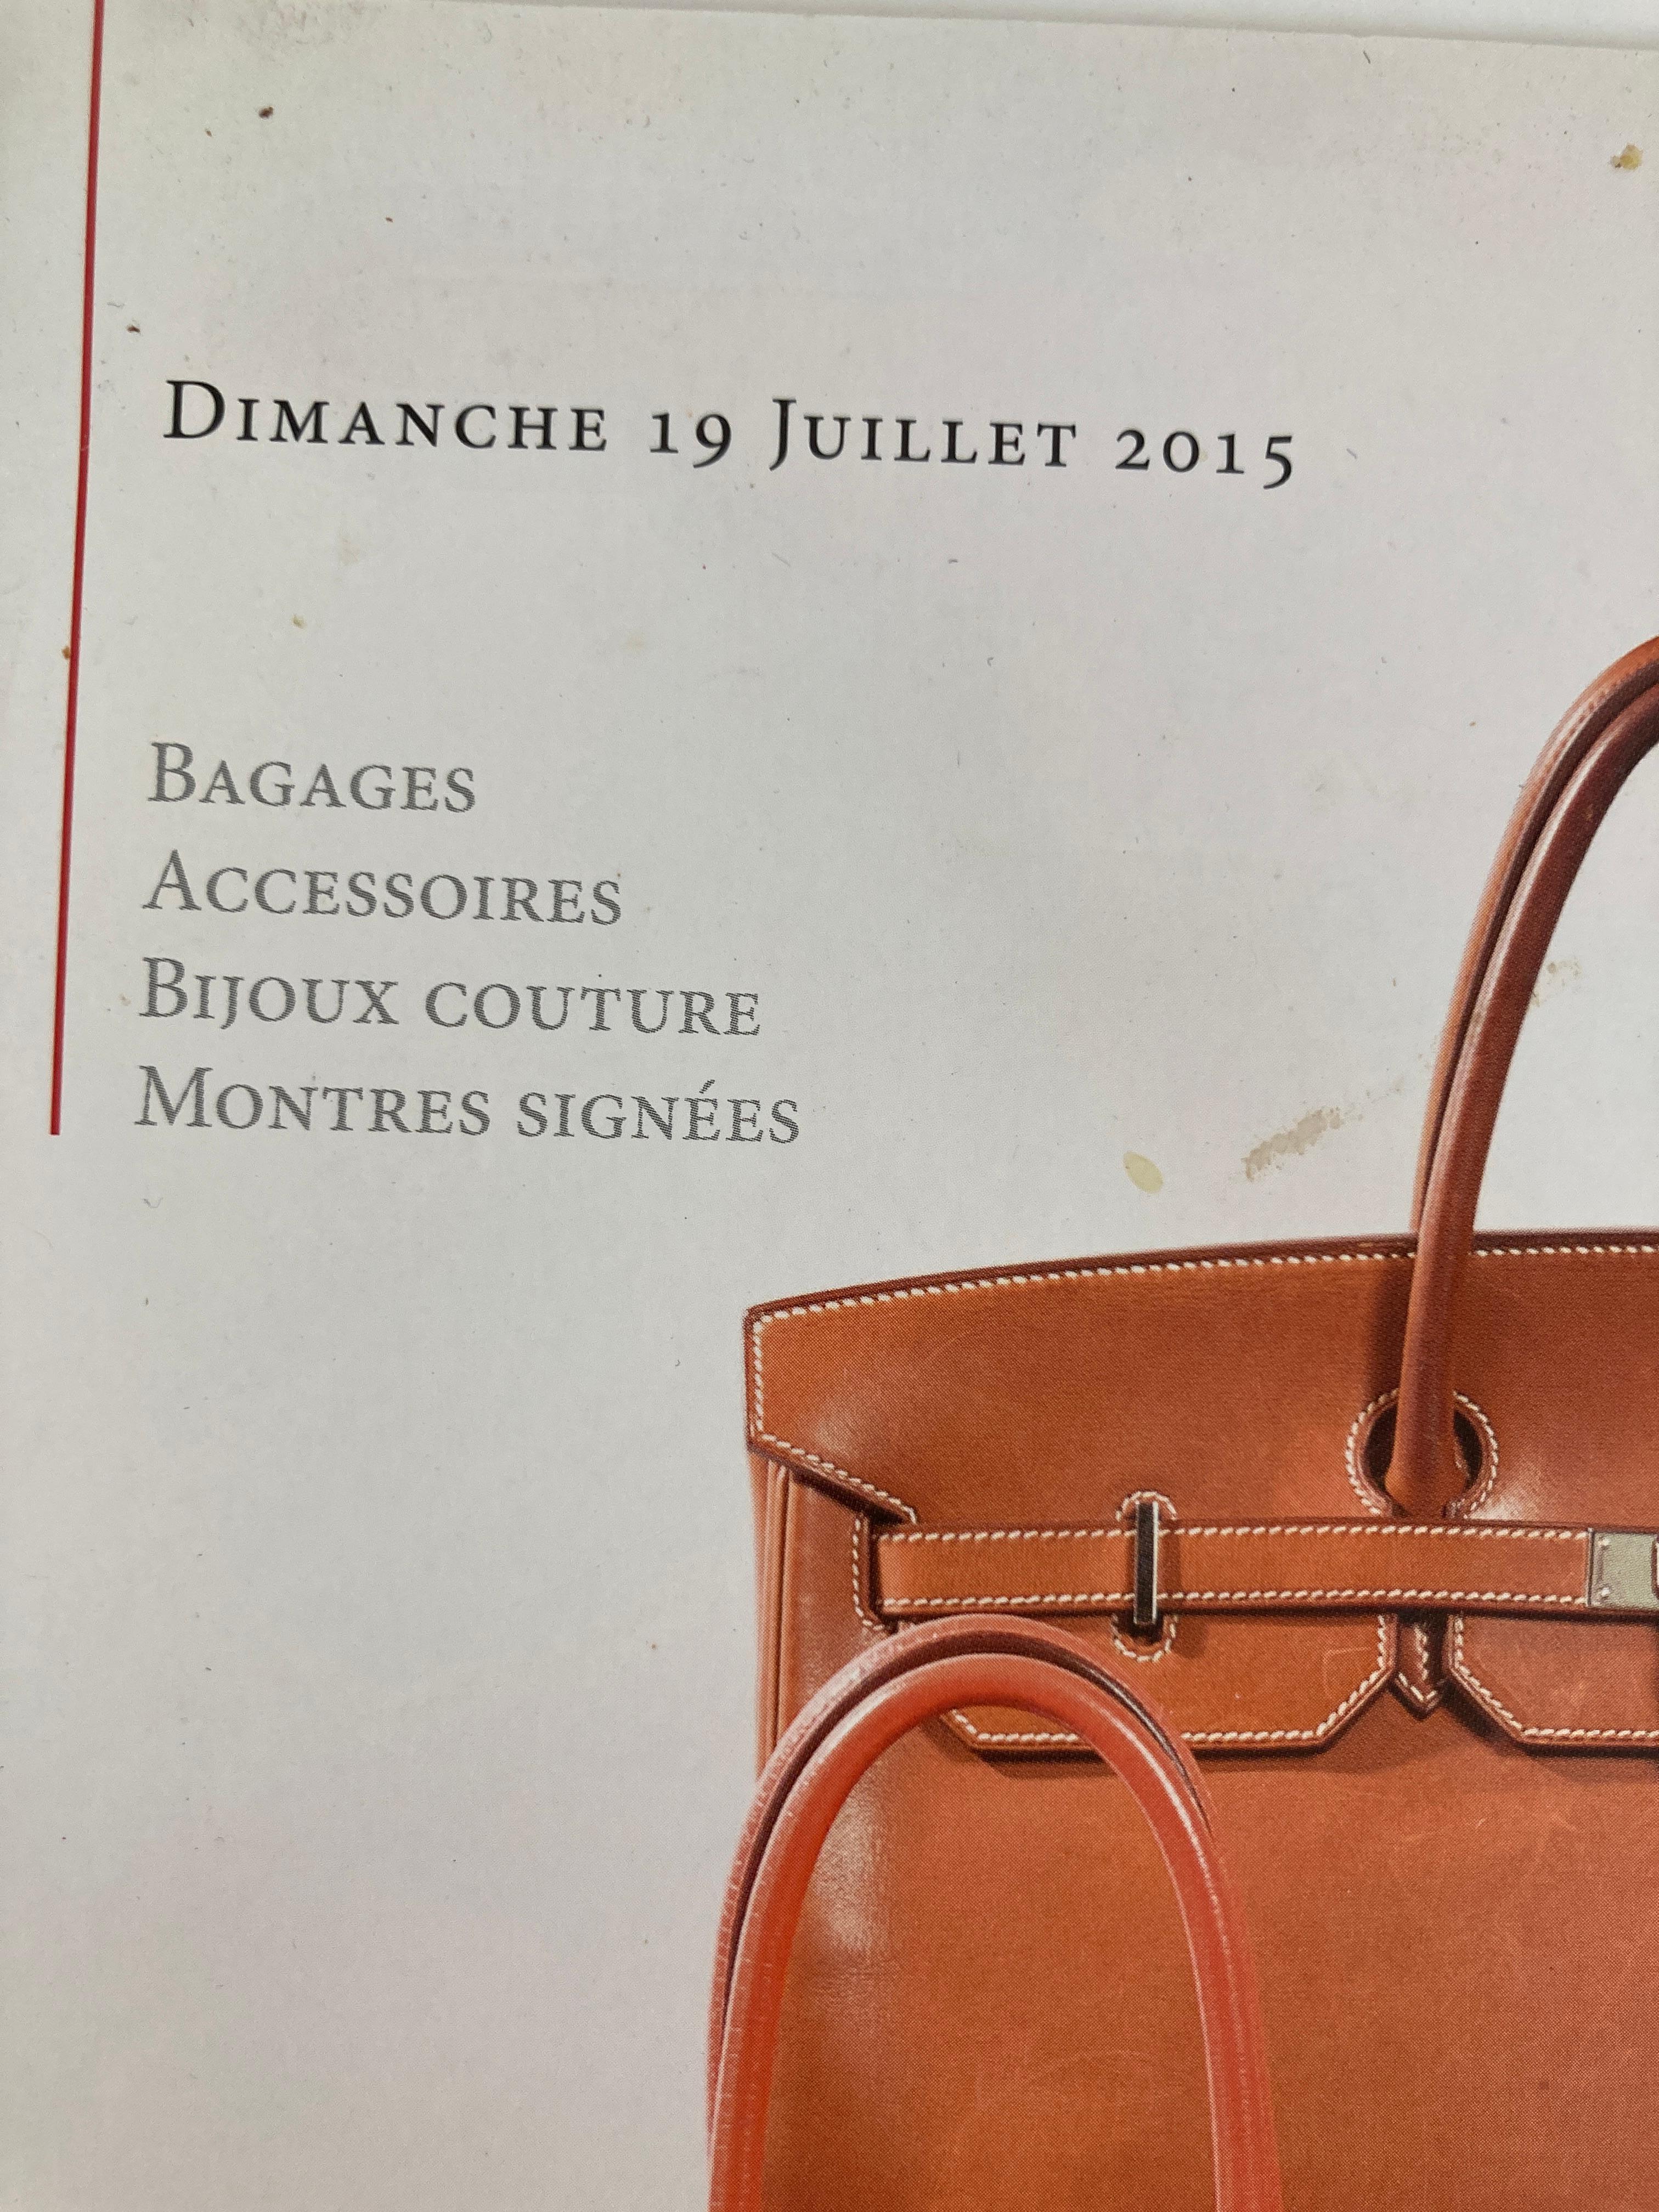 Haute Couture and Luxury Leather Goods by Besch Cannes Auction Catalog France, Juillet 2015.
Regular sales in one of the best luxury hotels of Cannes
Haute Couture and luxury leather goods, tableware, luxury leather goods, designer bags, jewels and